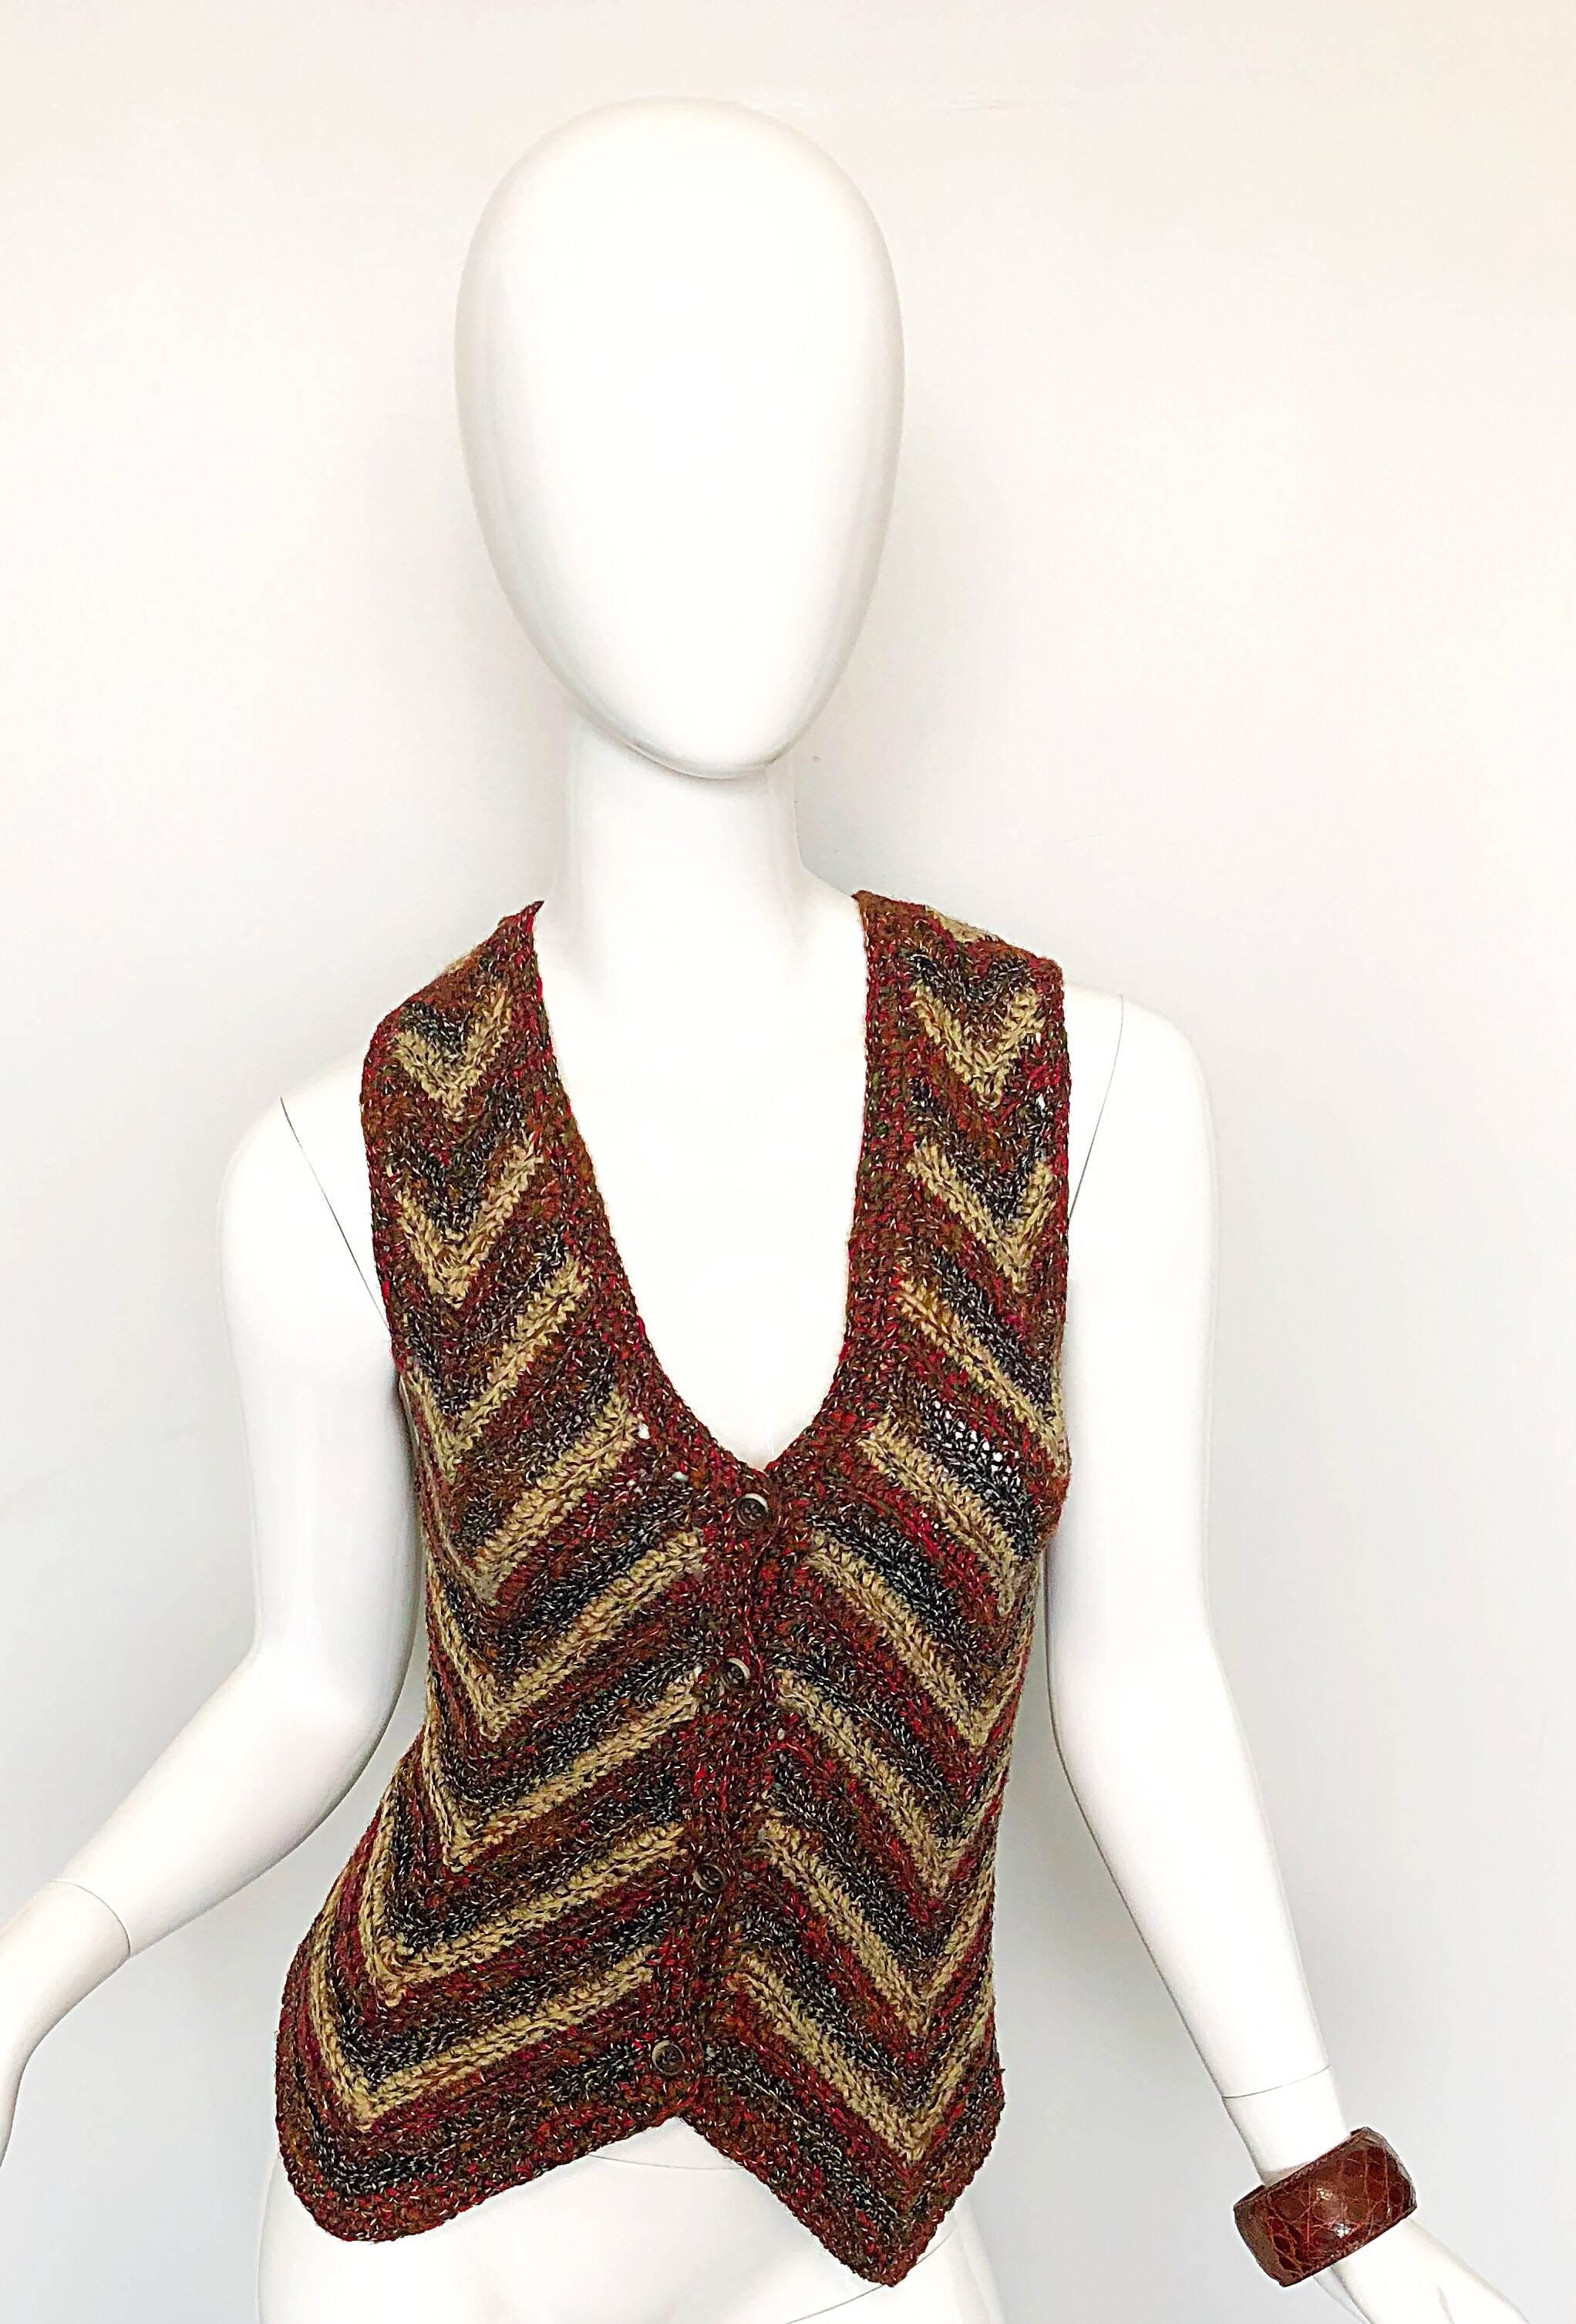 Wonderful vintage YVES SAINT LAURENT 'Rive Gauche' wool sweater vest cardigan from the infamous Russian Collection in 1976! Features warm tones of red, brown, tan, green and orange in a chevron striped pattern. Buttons up to bodice with scalloped